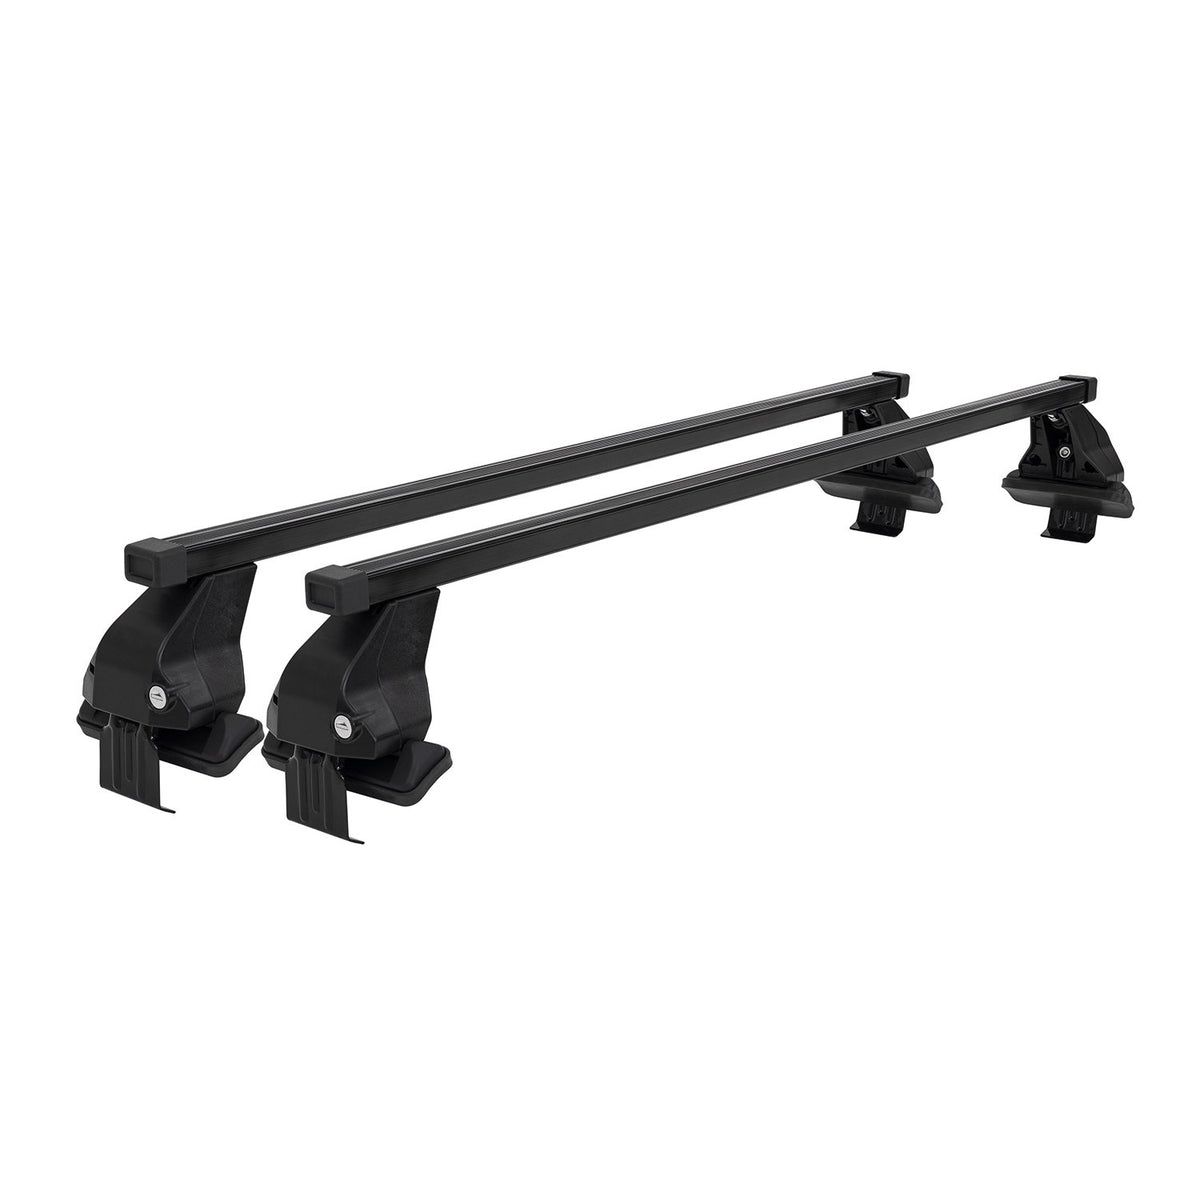 Menabo steel roof rack luggage rack for BMW X6 E71 2017-2014 black 2-piece